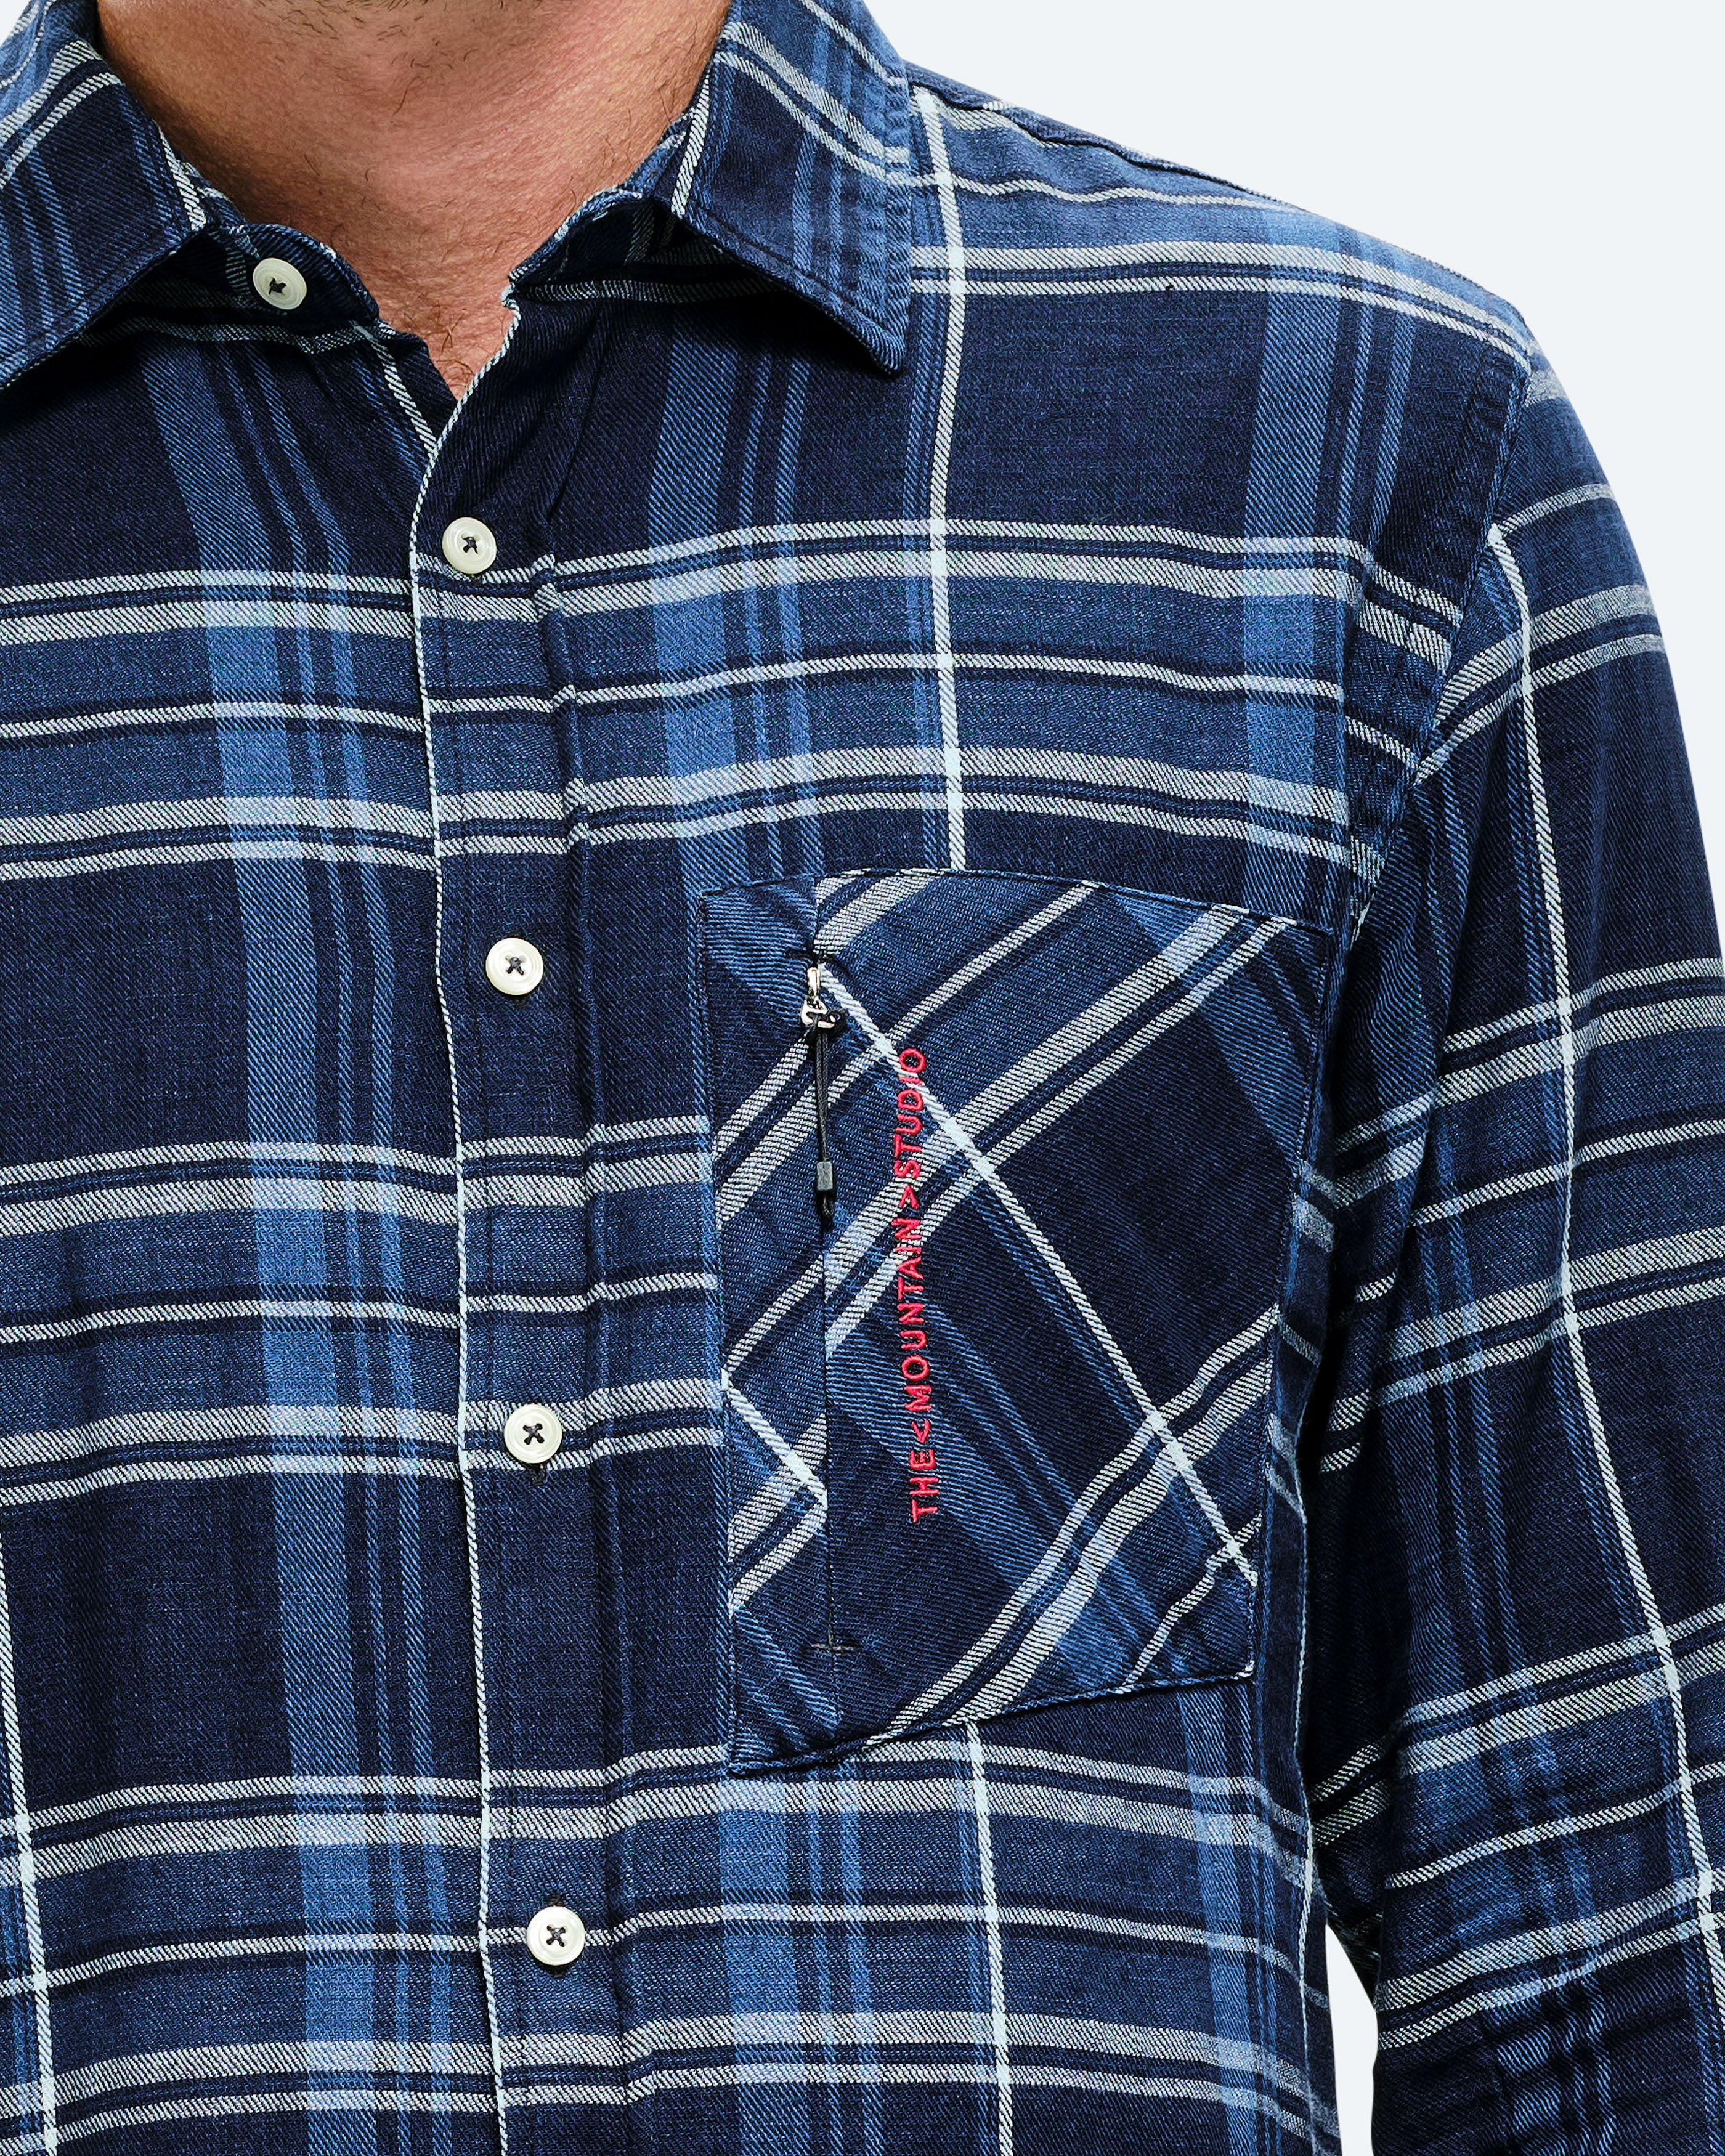 Signature Chest Pocket with zip. card image